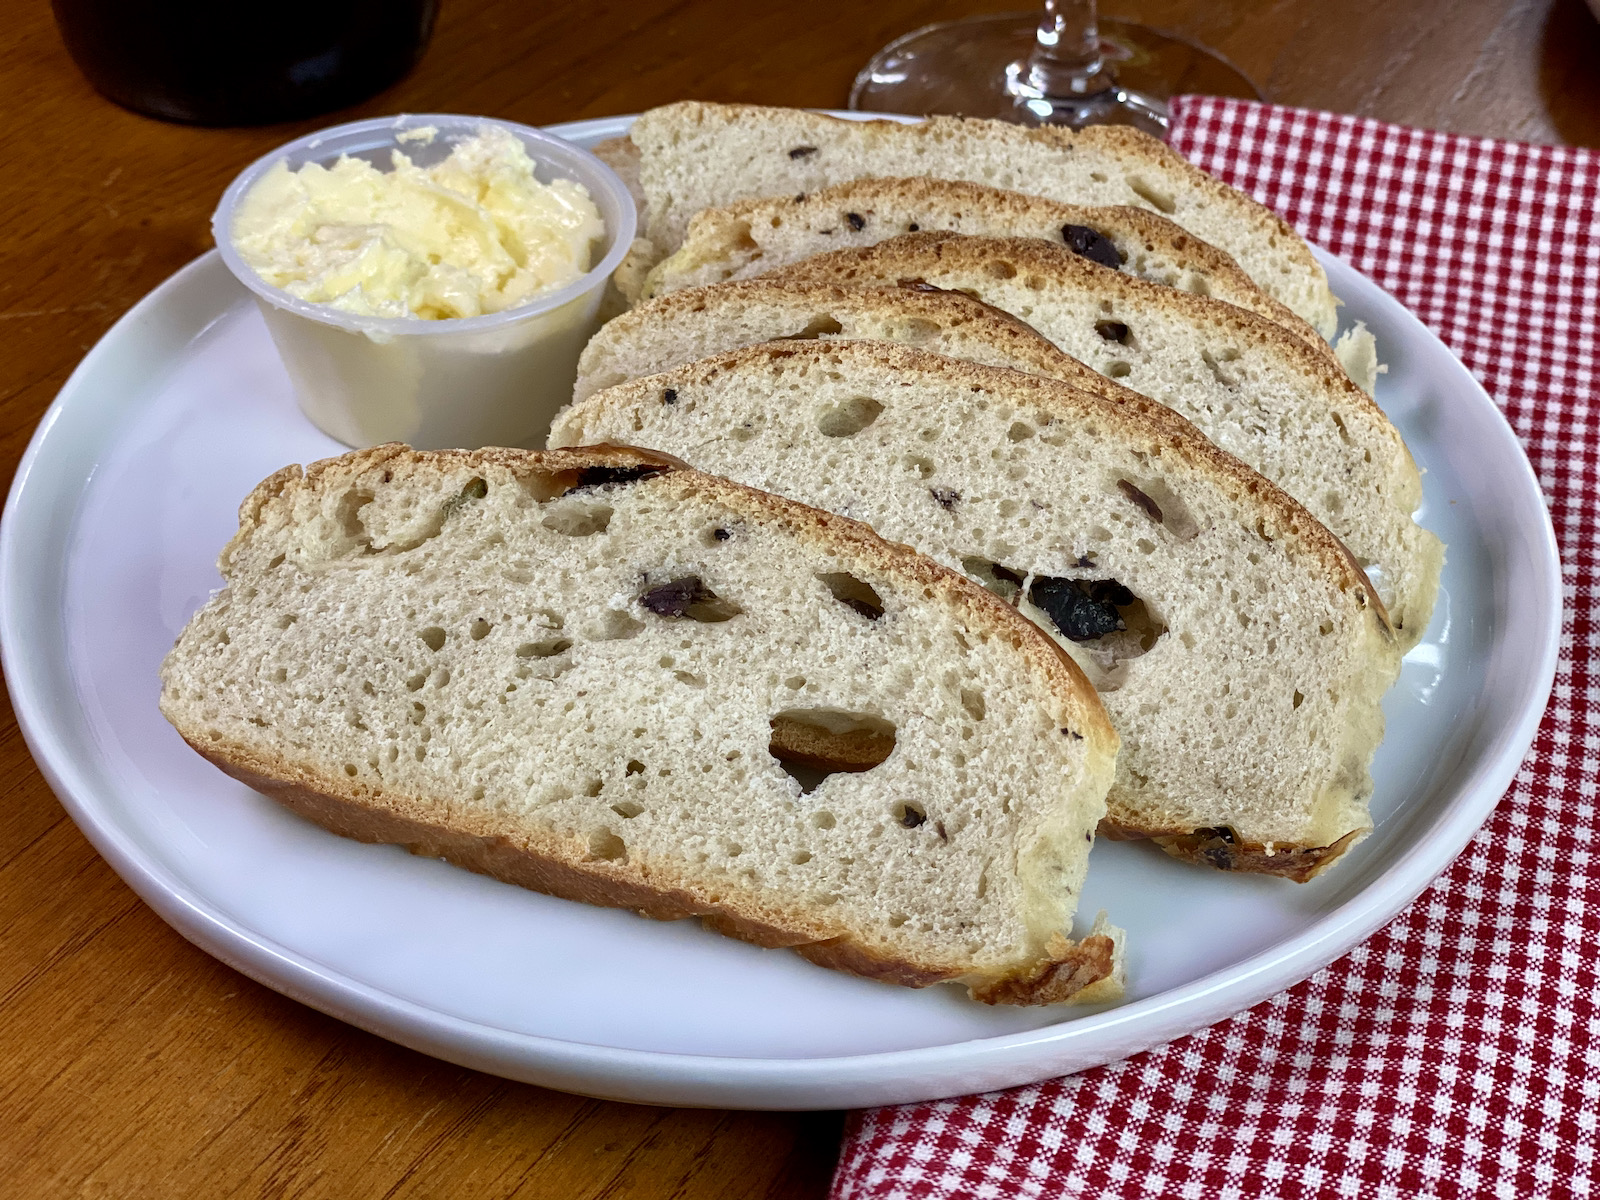 Olive bread from The Pasta Tree